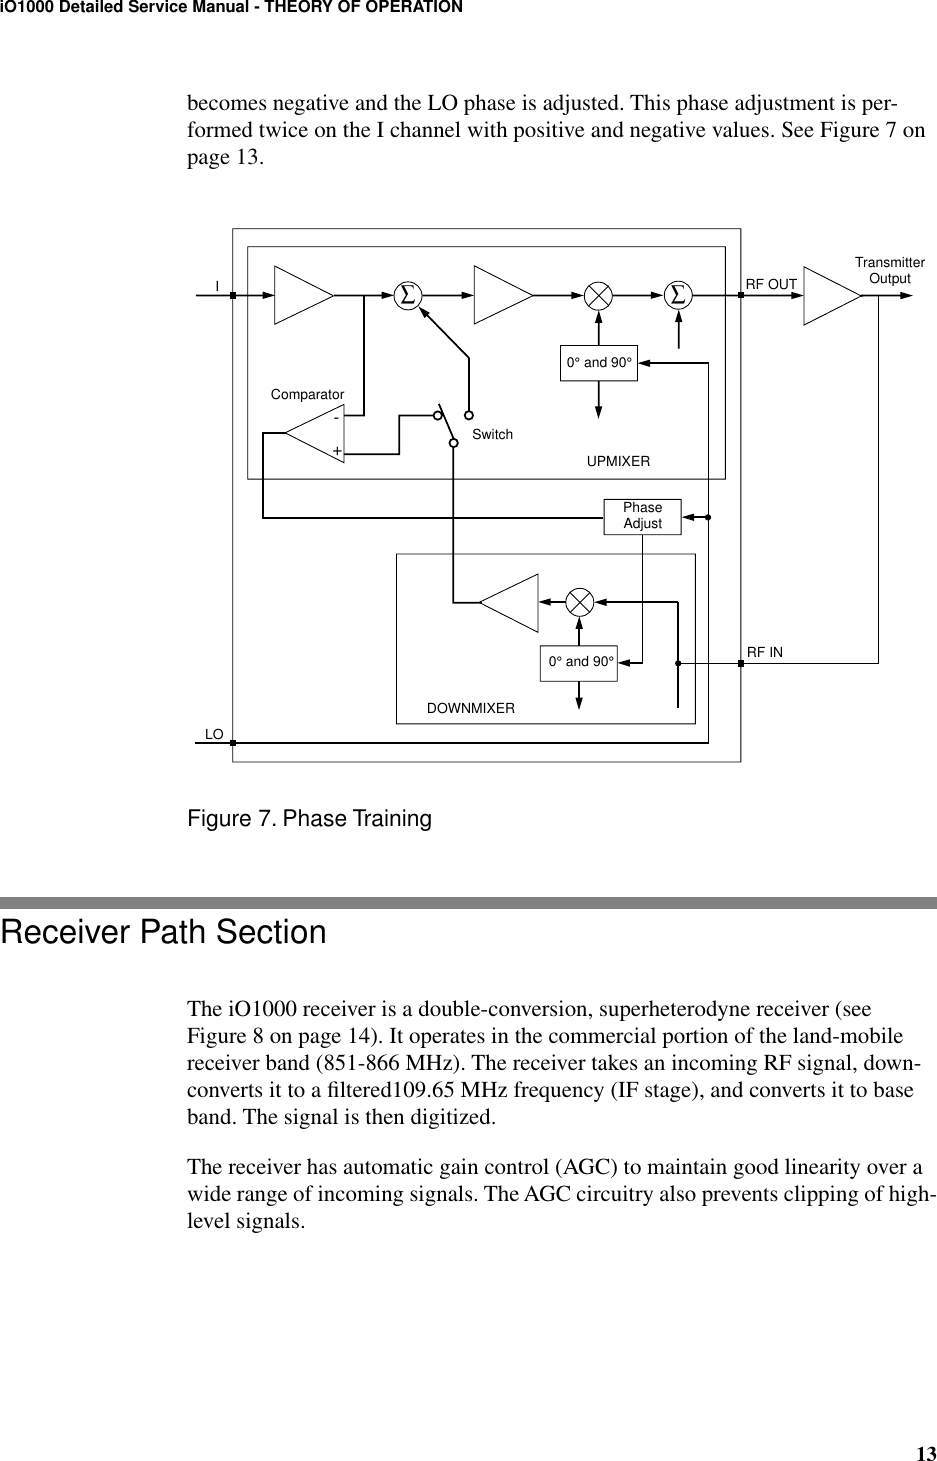 13iO1000 Detailed Service Manual - THEORY OF OPERATIONbecomes negative and the LO phase is adjusted. This phase adjustment is per-formed twice on the I channel with positive and negative values. See Figure 7 on page 13.Figure 7. Phase TrainingReceiver Path SectionThe iO1000 receiver is a double-conversion, superheterodyne receiver (see Figure 8 on page 14). It operates in the commercial portion of the land-mobile receiver band (851-866 MHz). The receiver takes an incoming RF signal, down-converts it to a ﬁltered109.65 MHz frequency (IF stage), and converts it to base band. The signal is then digitized.The receiver has automatic gain control (AGC) to maintain good linearity over a wide range of incoming signals. The AGC circuitry also prevents clipping of high-level signals.ILODOWNMIXER0° and 90°PhaseAdjust0° and 90°RF INUPMIXERSwitchComparatorRF OUTTransmitterOutput ∑∑+-